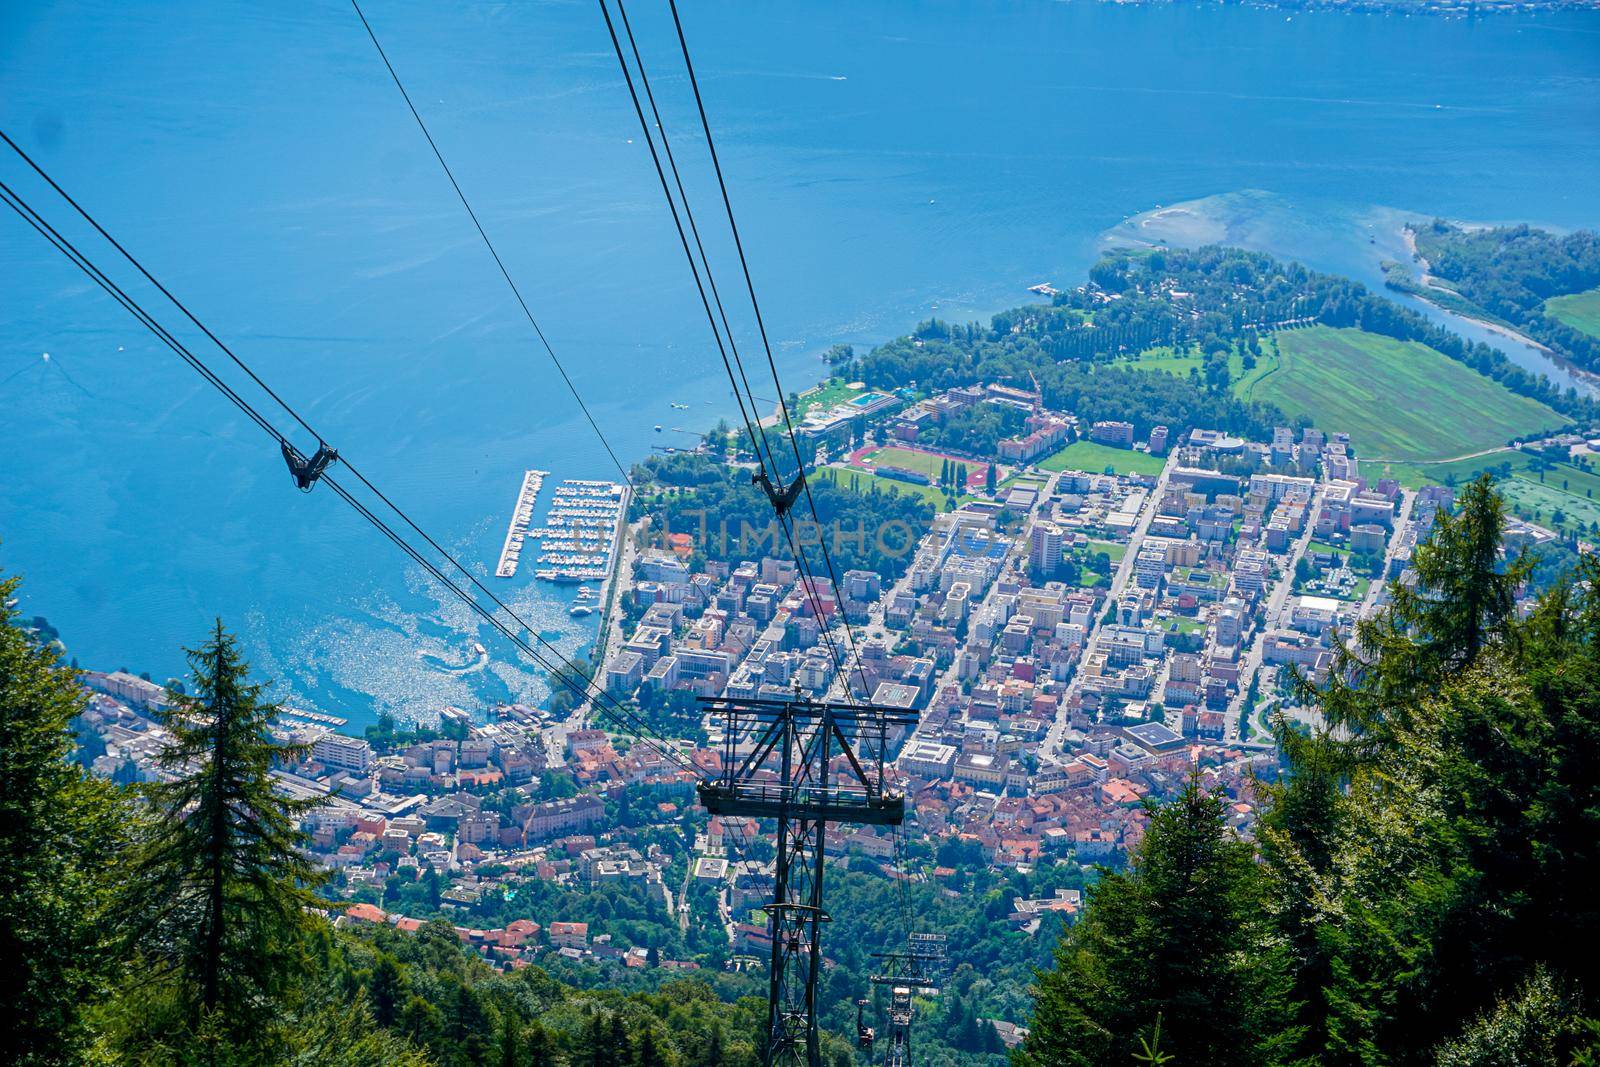 Funicular to Cardada mountain and the city of Locarno it's famous with port